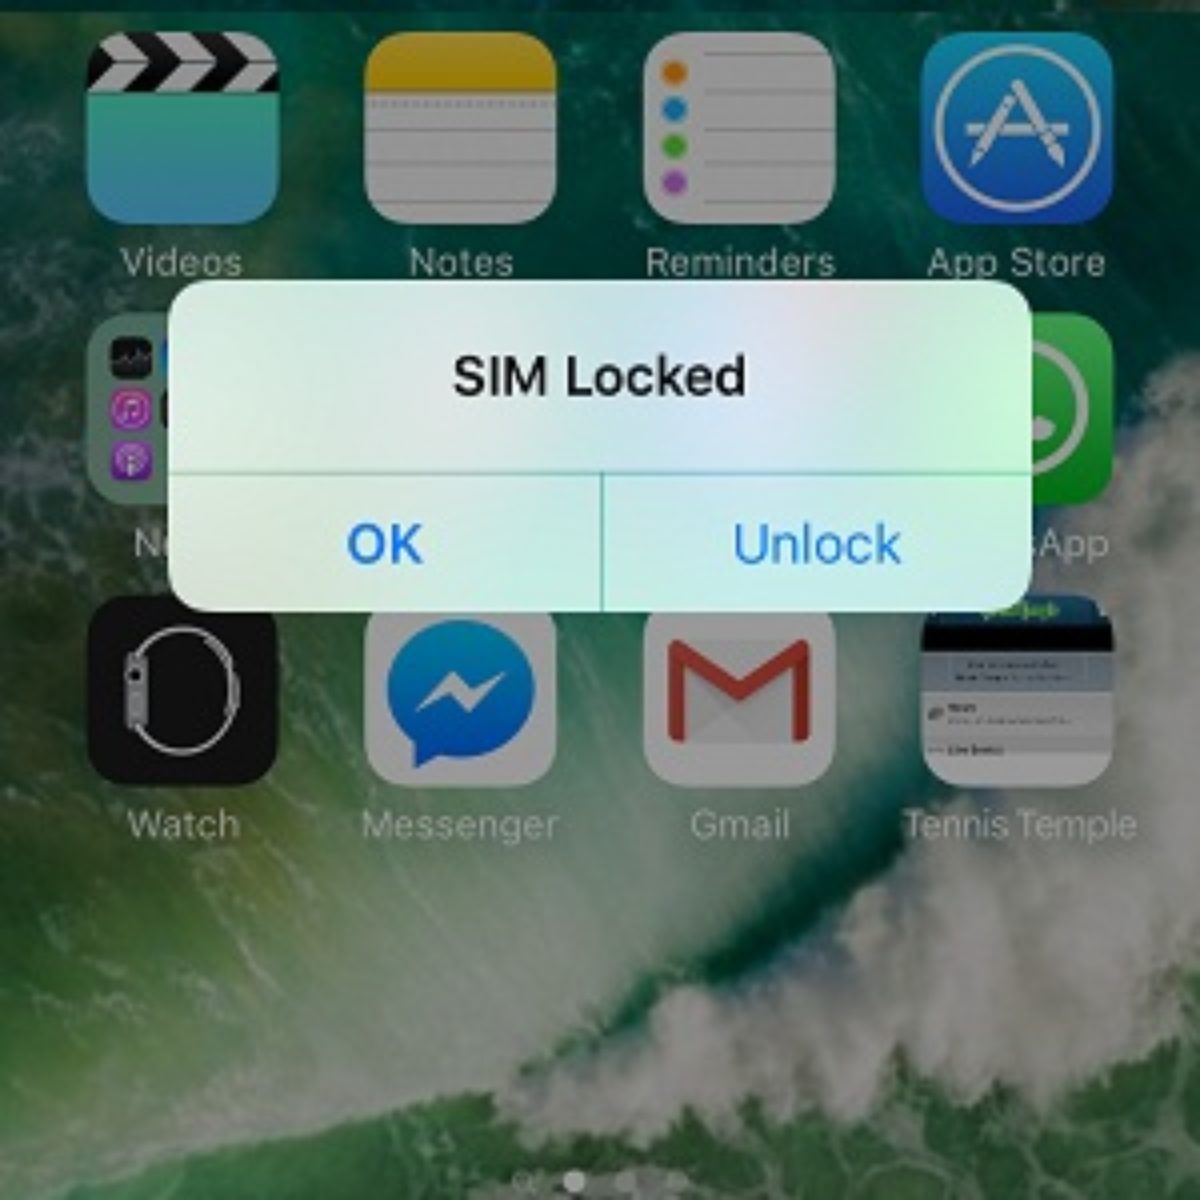 network locked sim card meaning